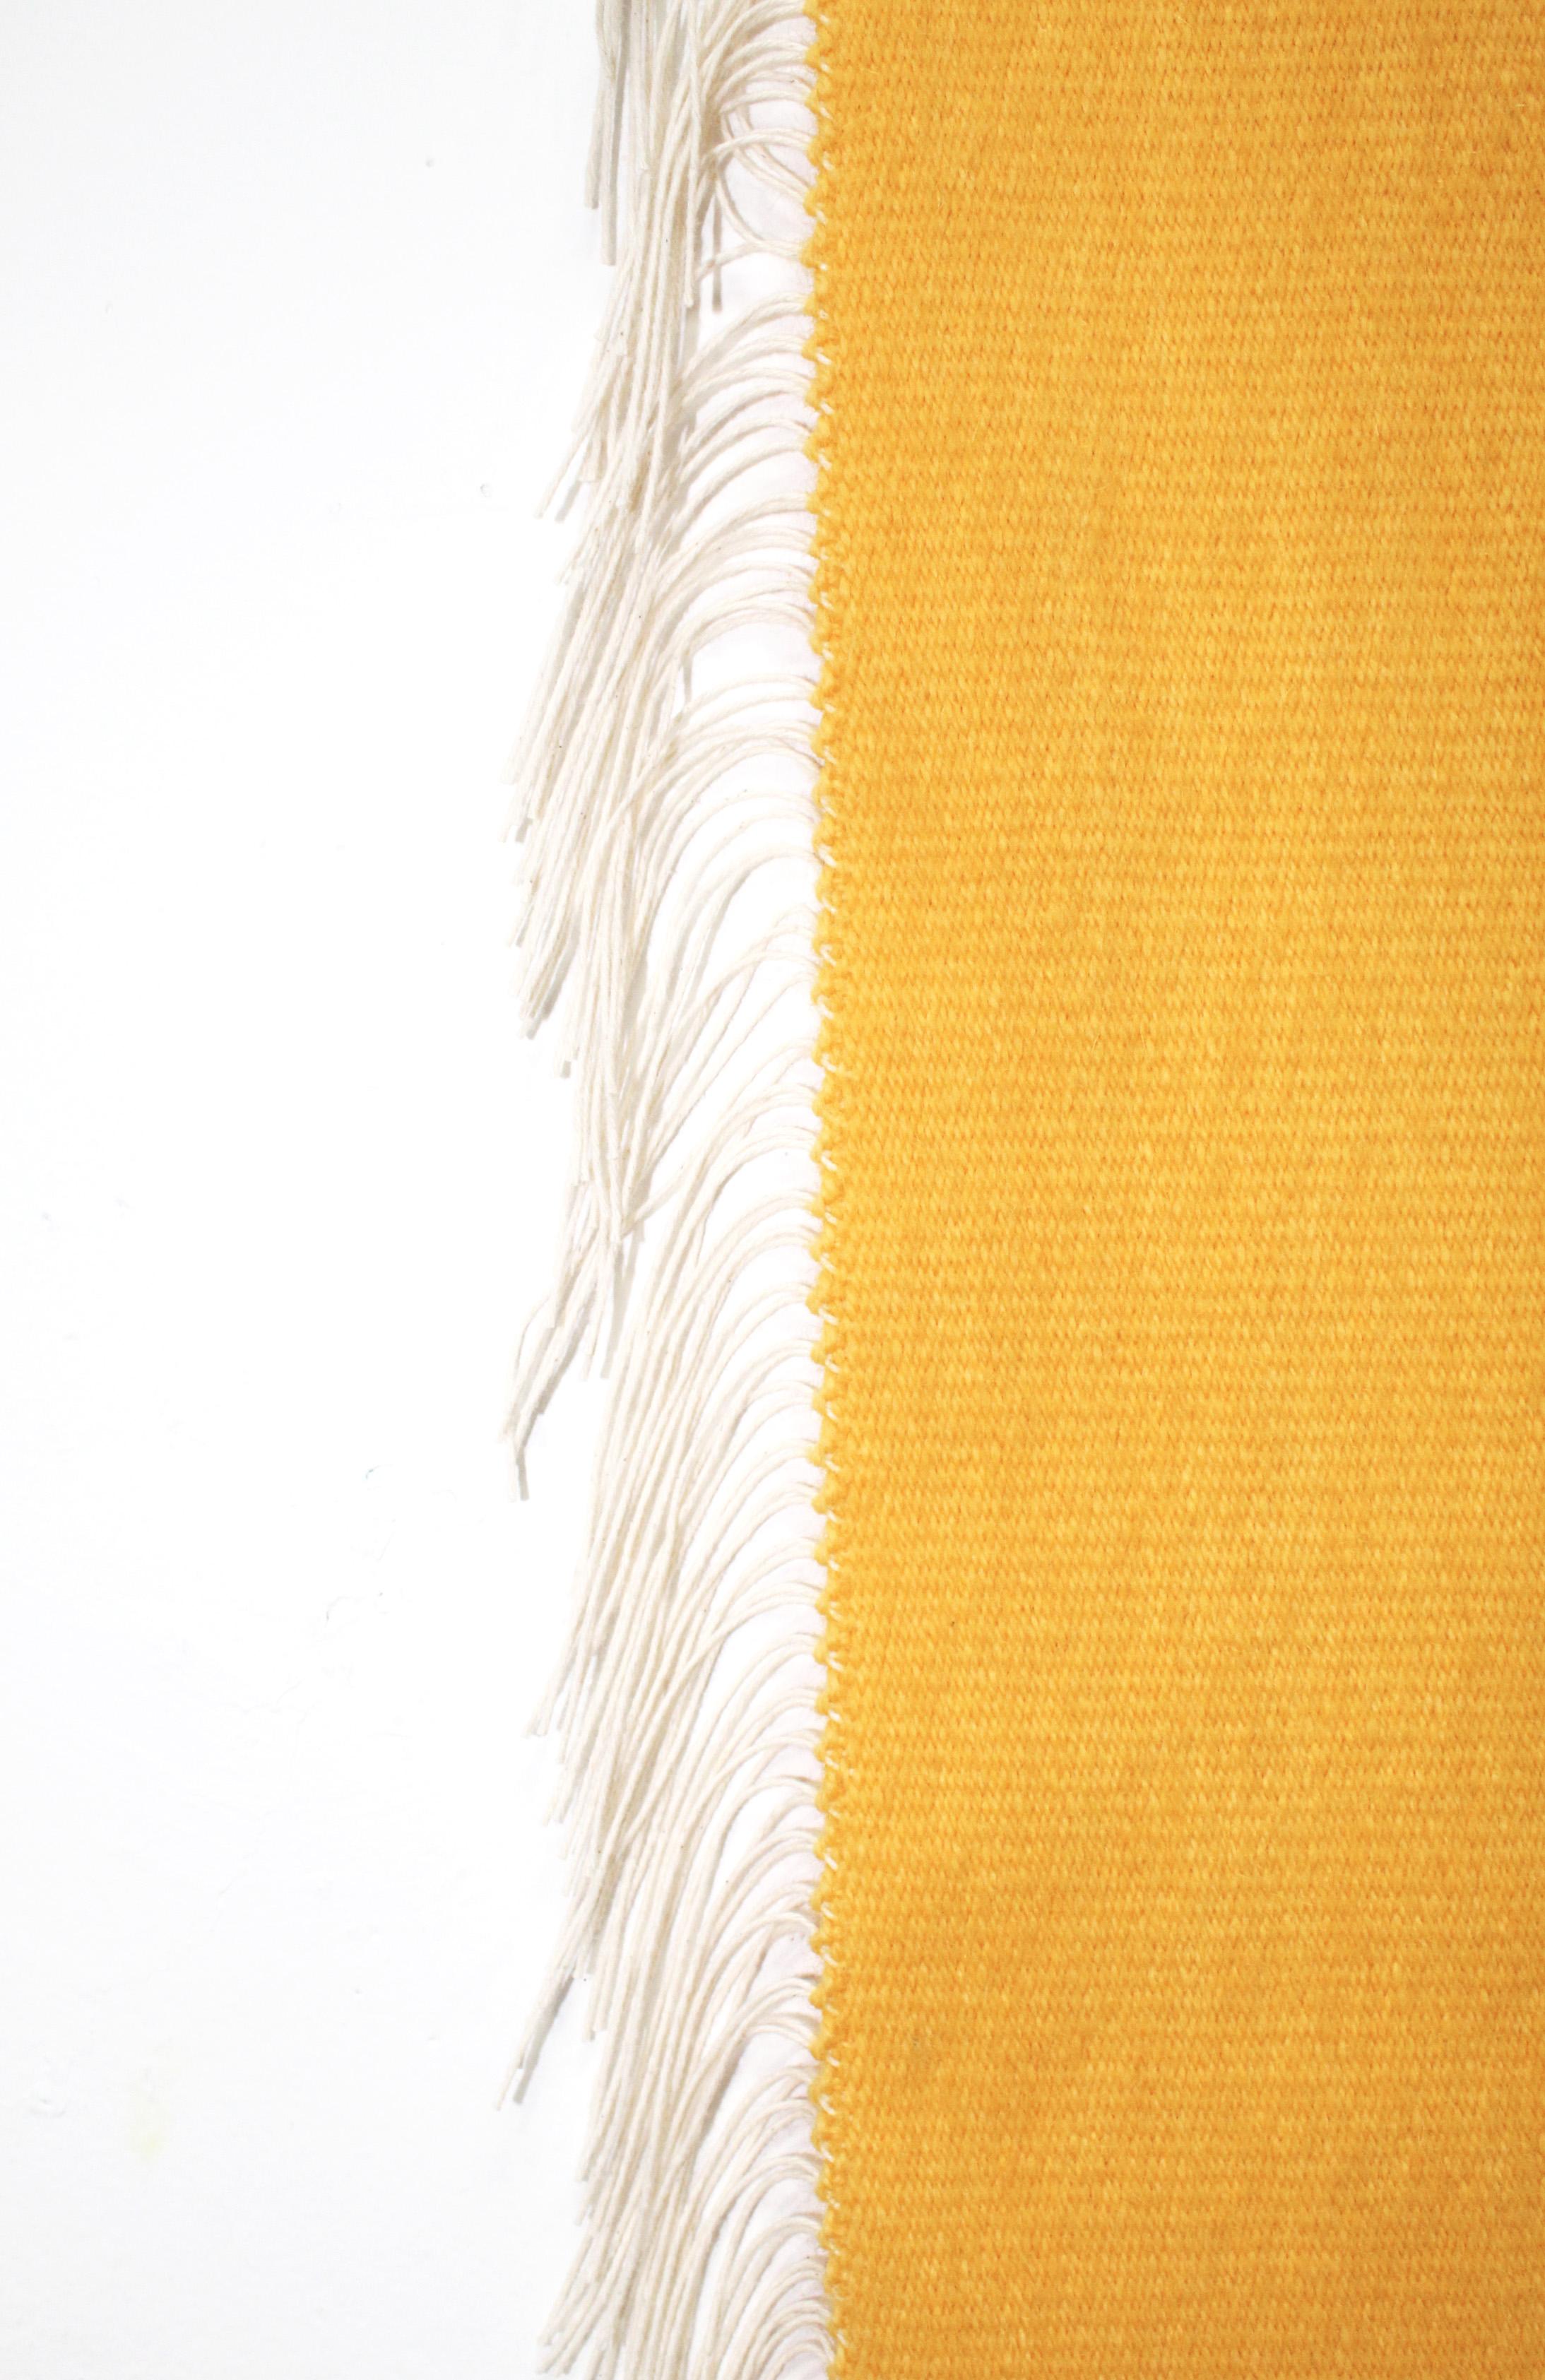 Hand-Woven Yellow and Grey Toned Wool Handwoven Rug Kilim or Tapestry